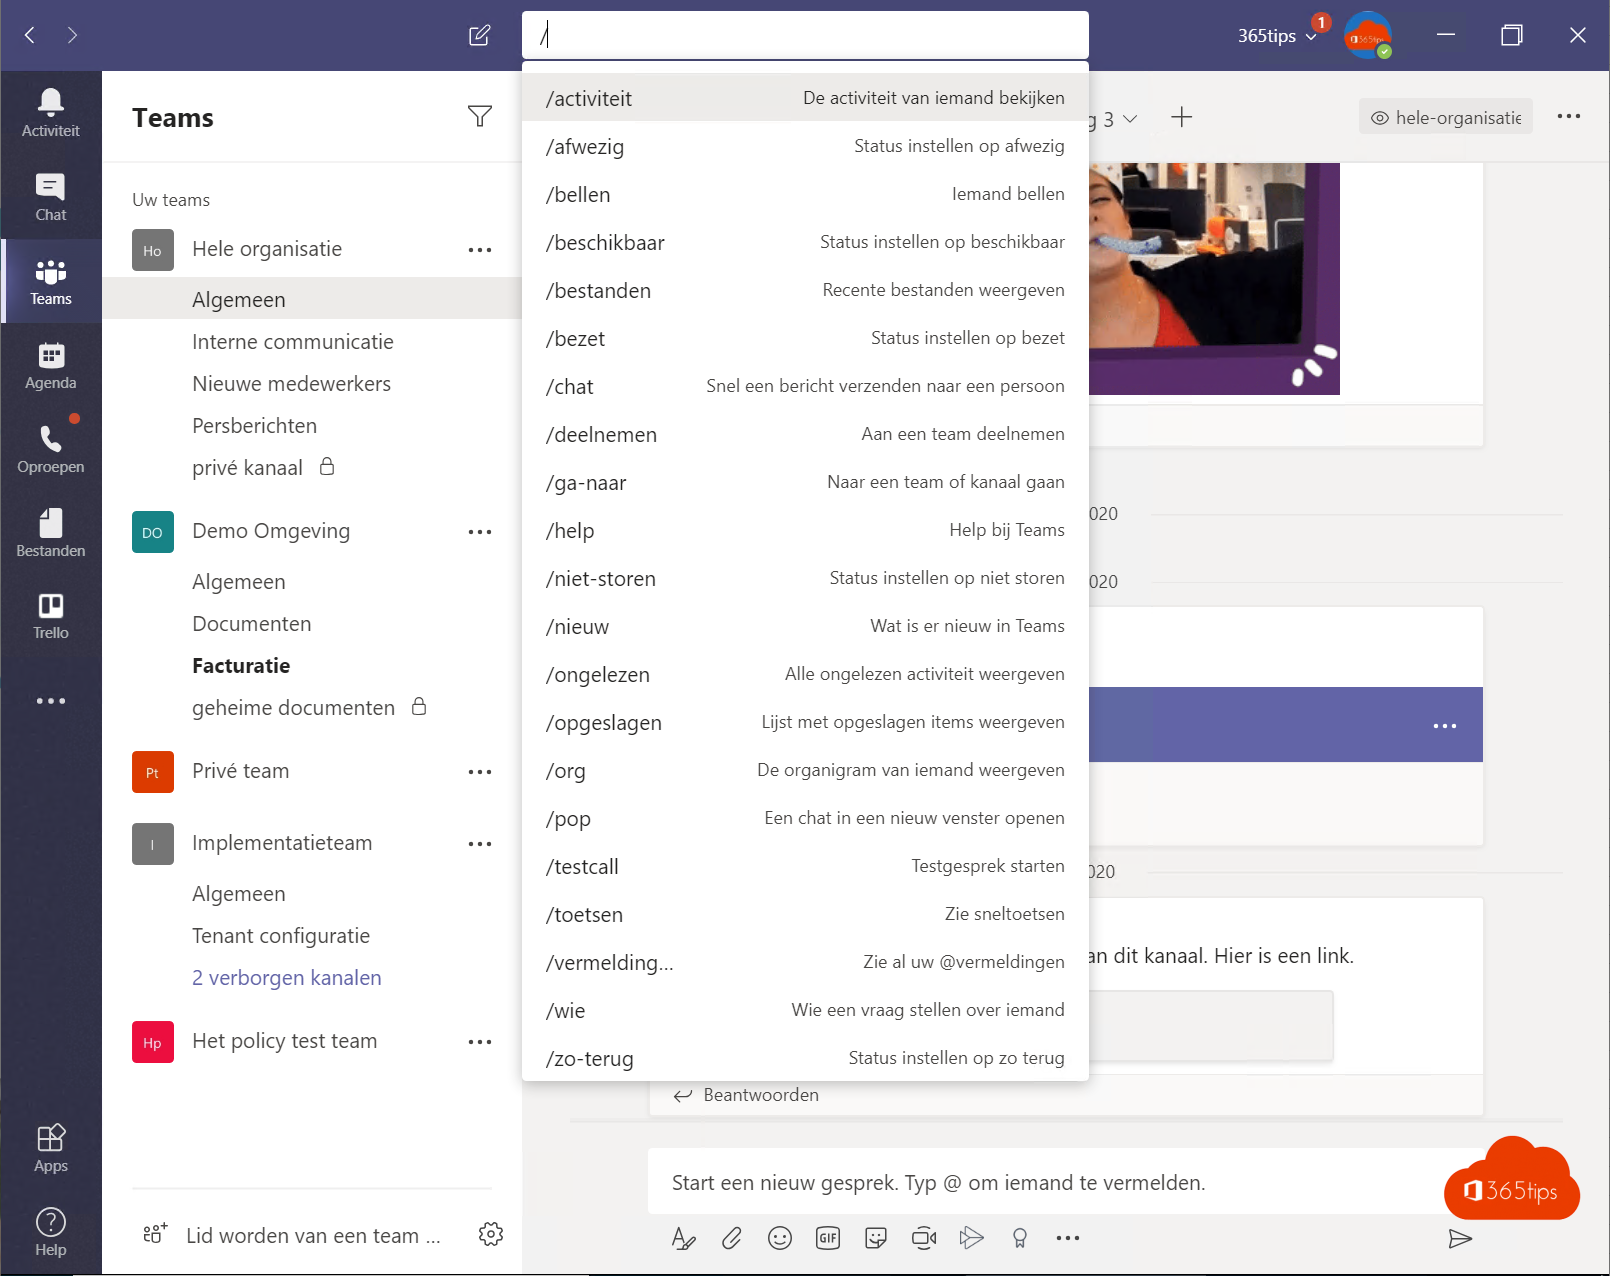 Search bar commands - Faster navigation through Microsoft Teams